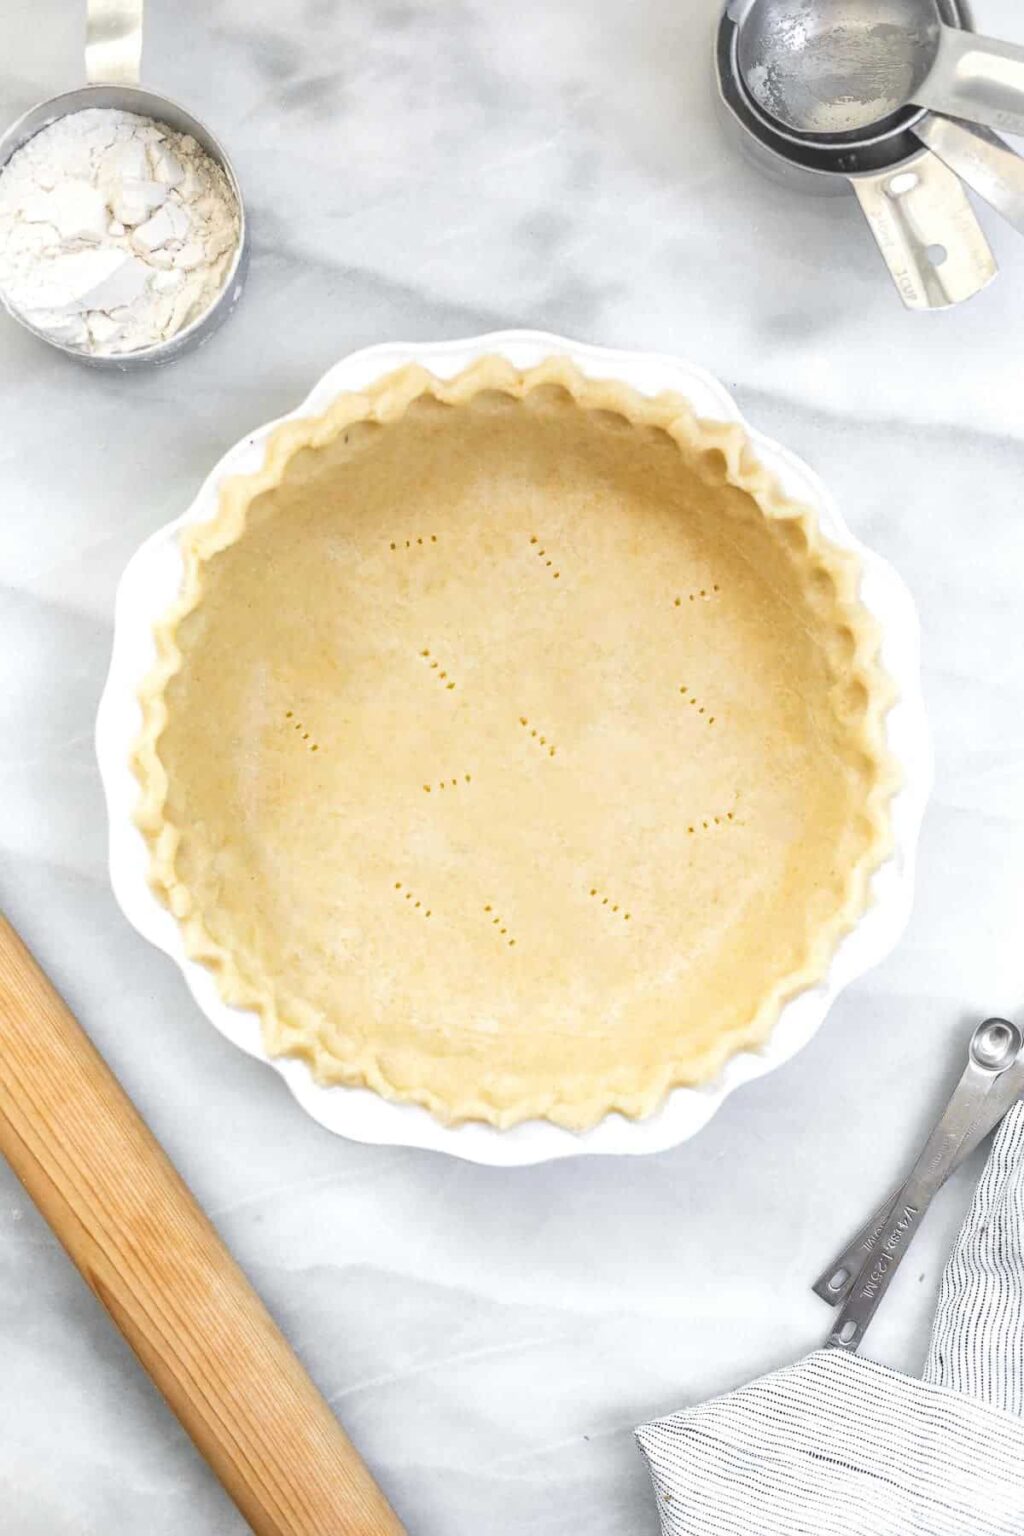 Easy Gluten Free Pie Crust 15 Minutes Eat With Clarity